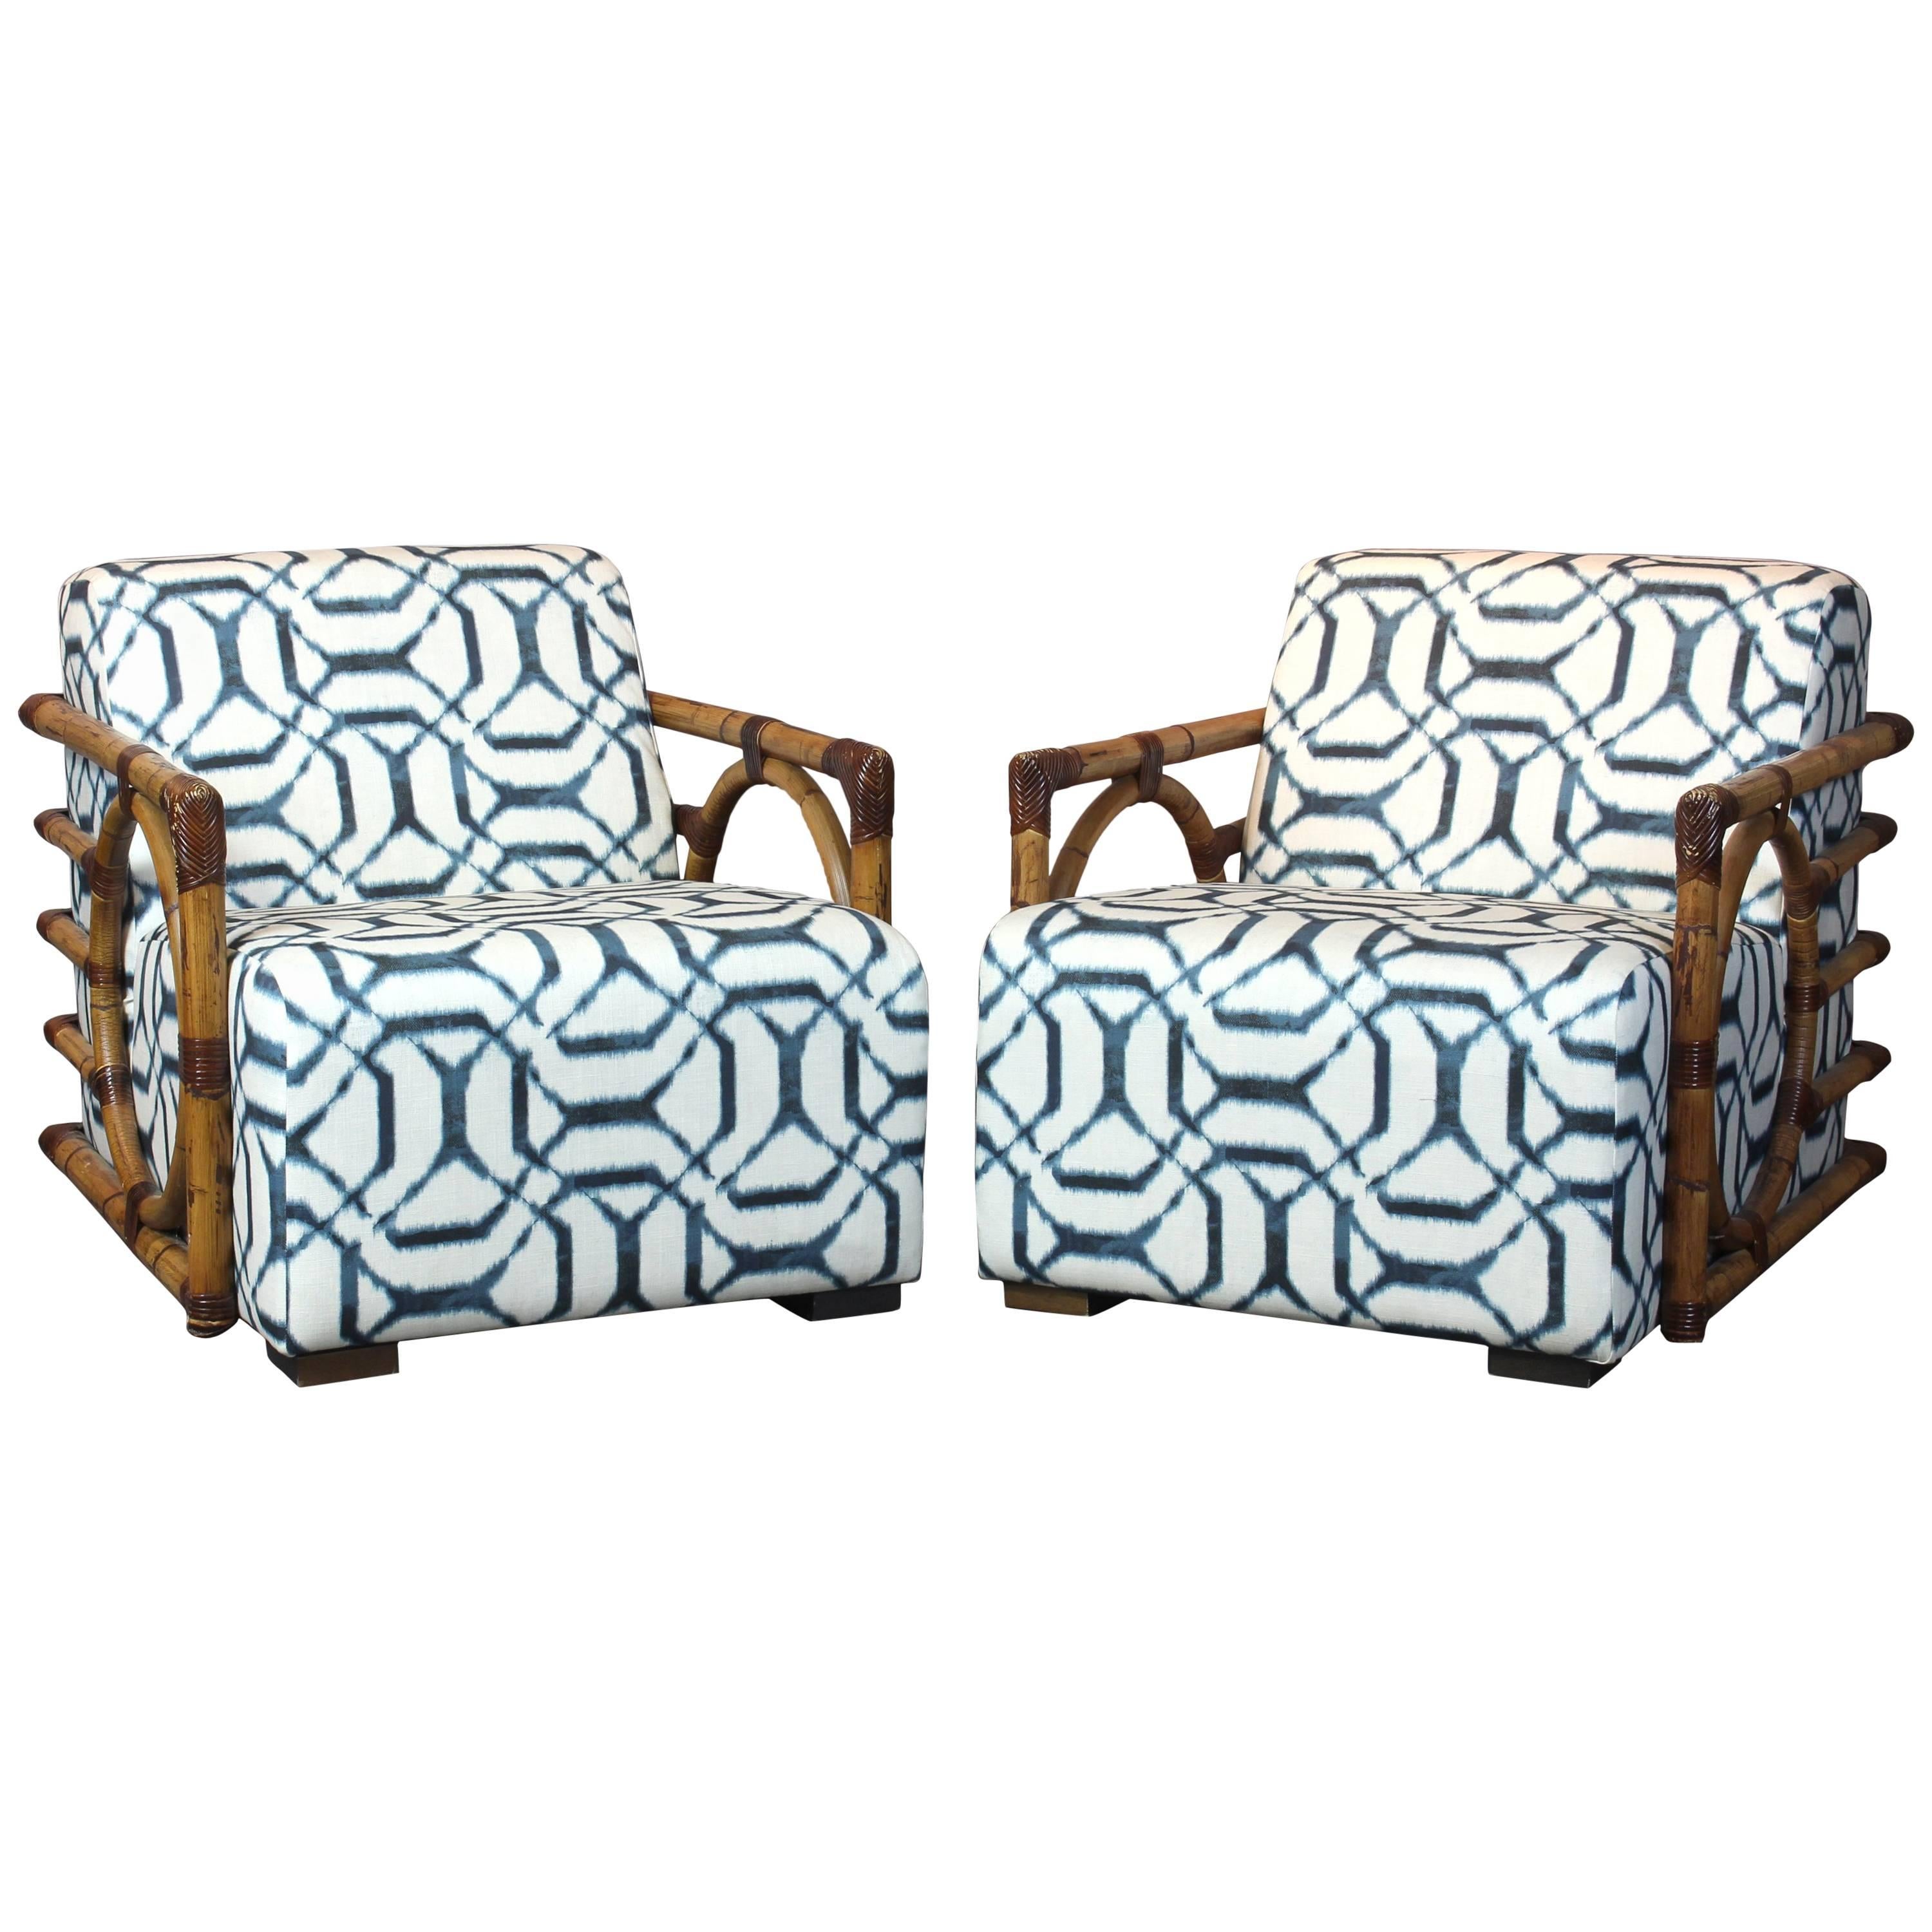 Pair of Art Deco Inspired Rattan Lounge Chairs